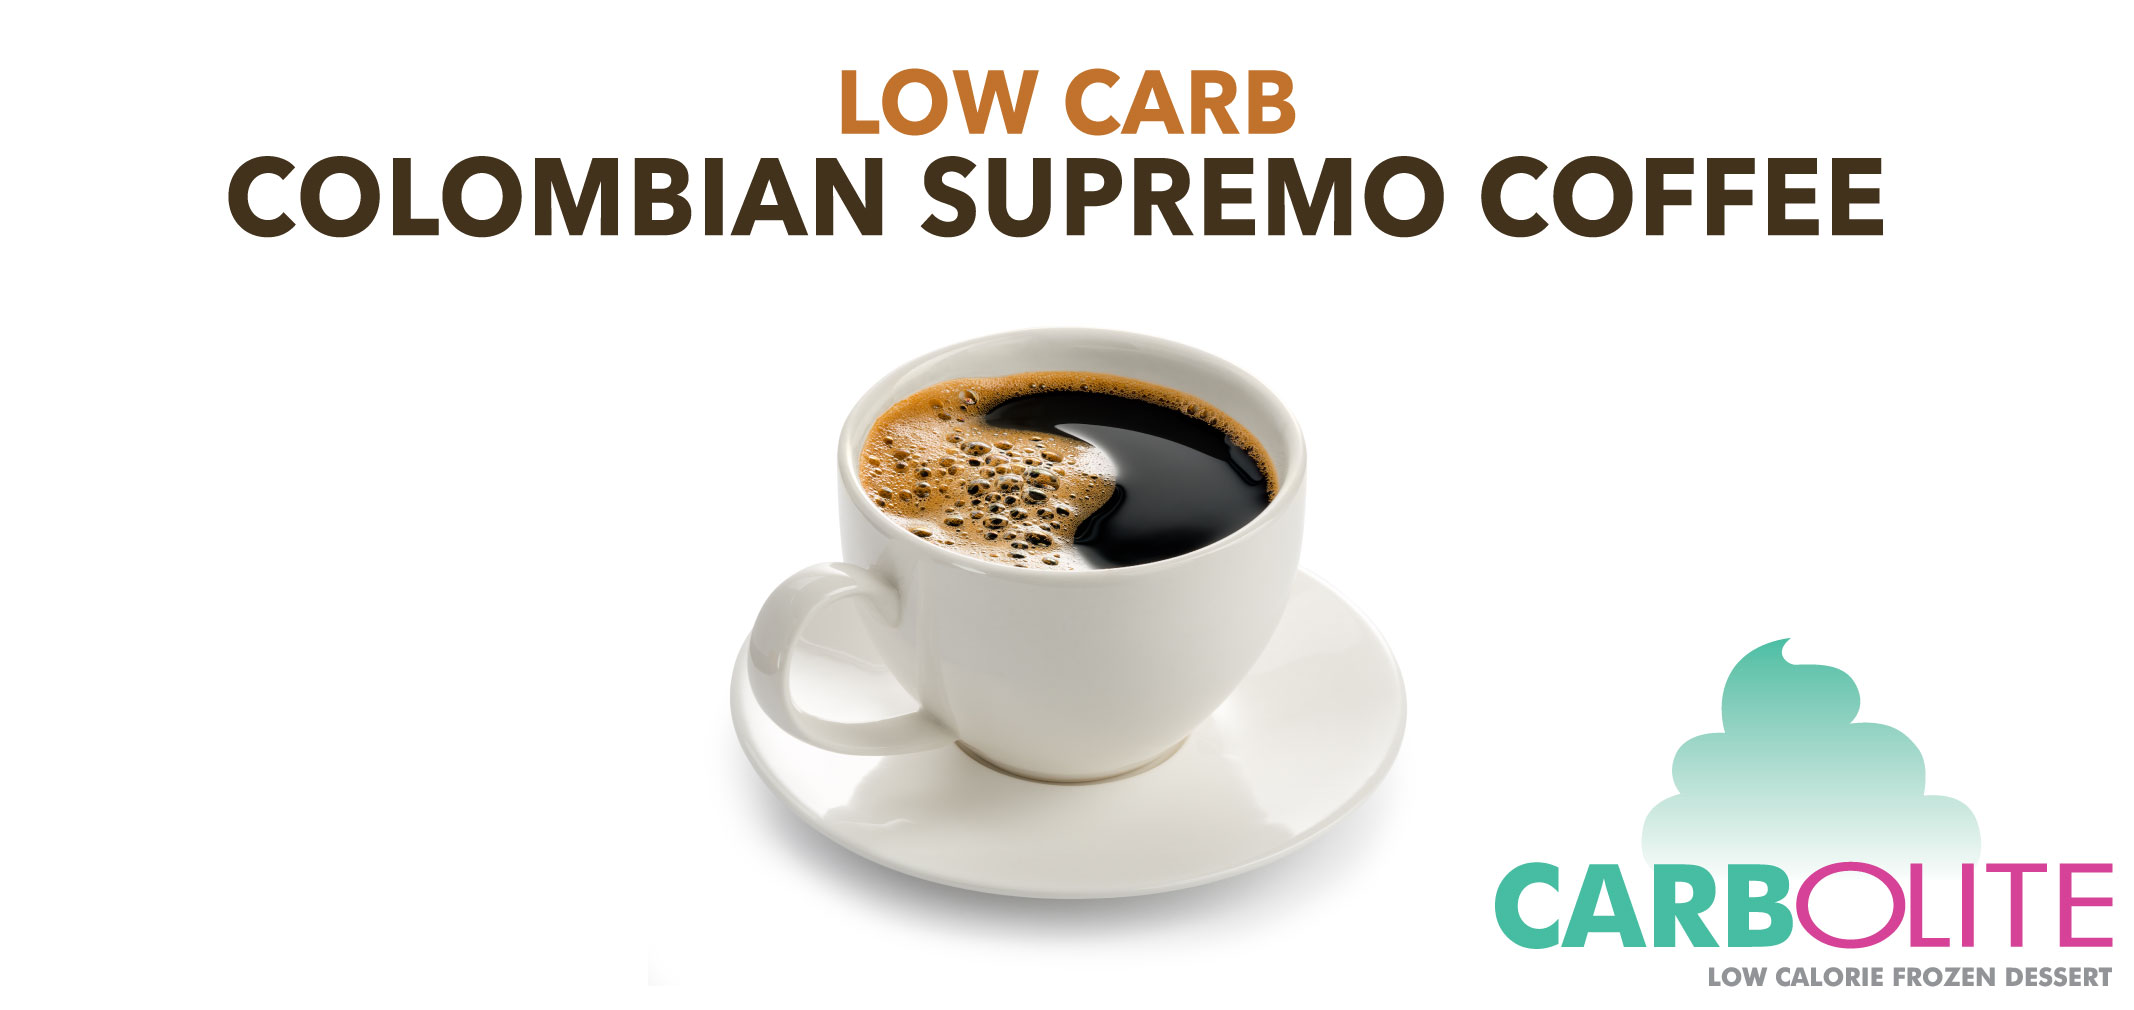 carbolite low carb no sugar added colombian supremo coffee label image